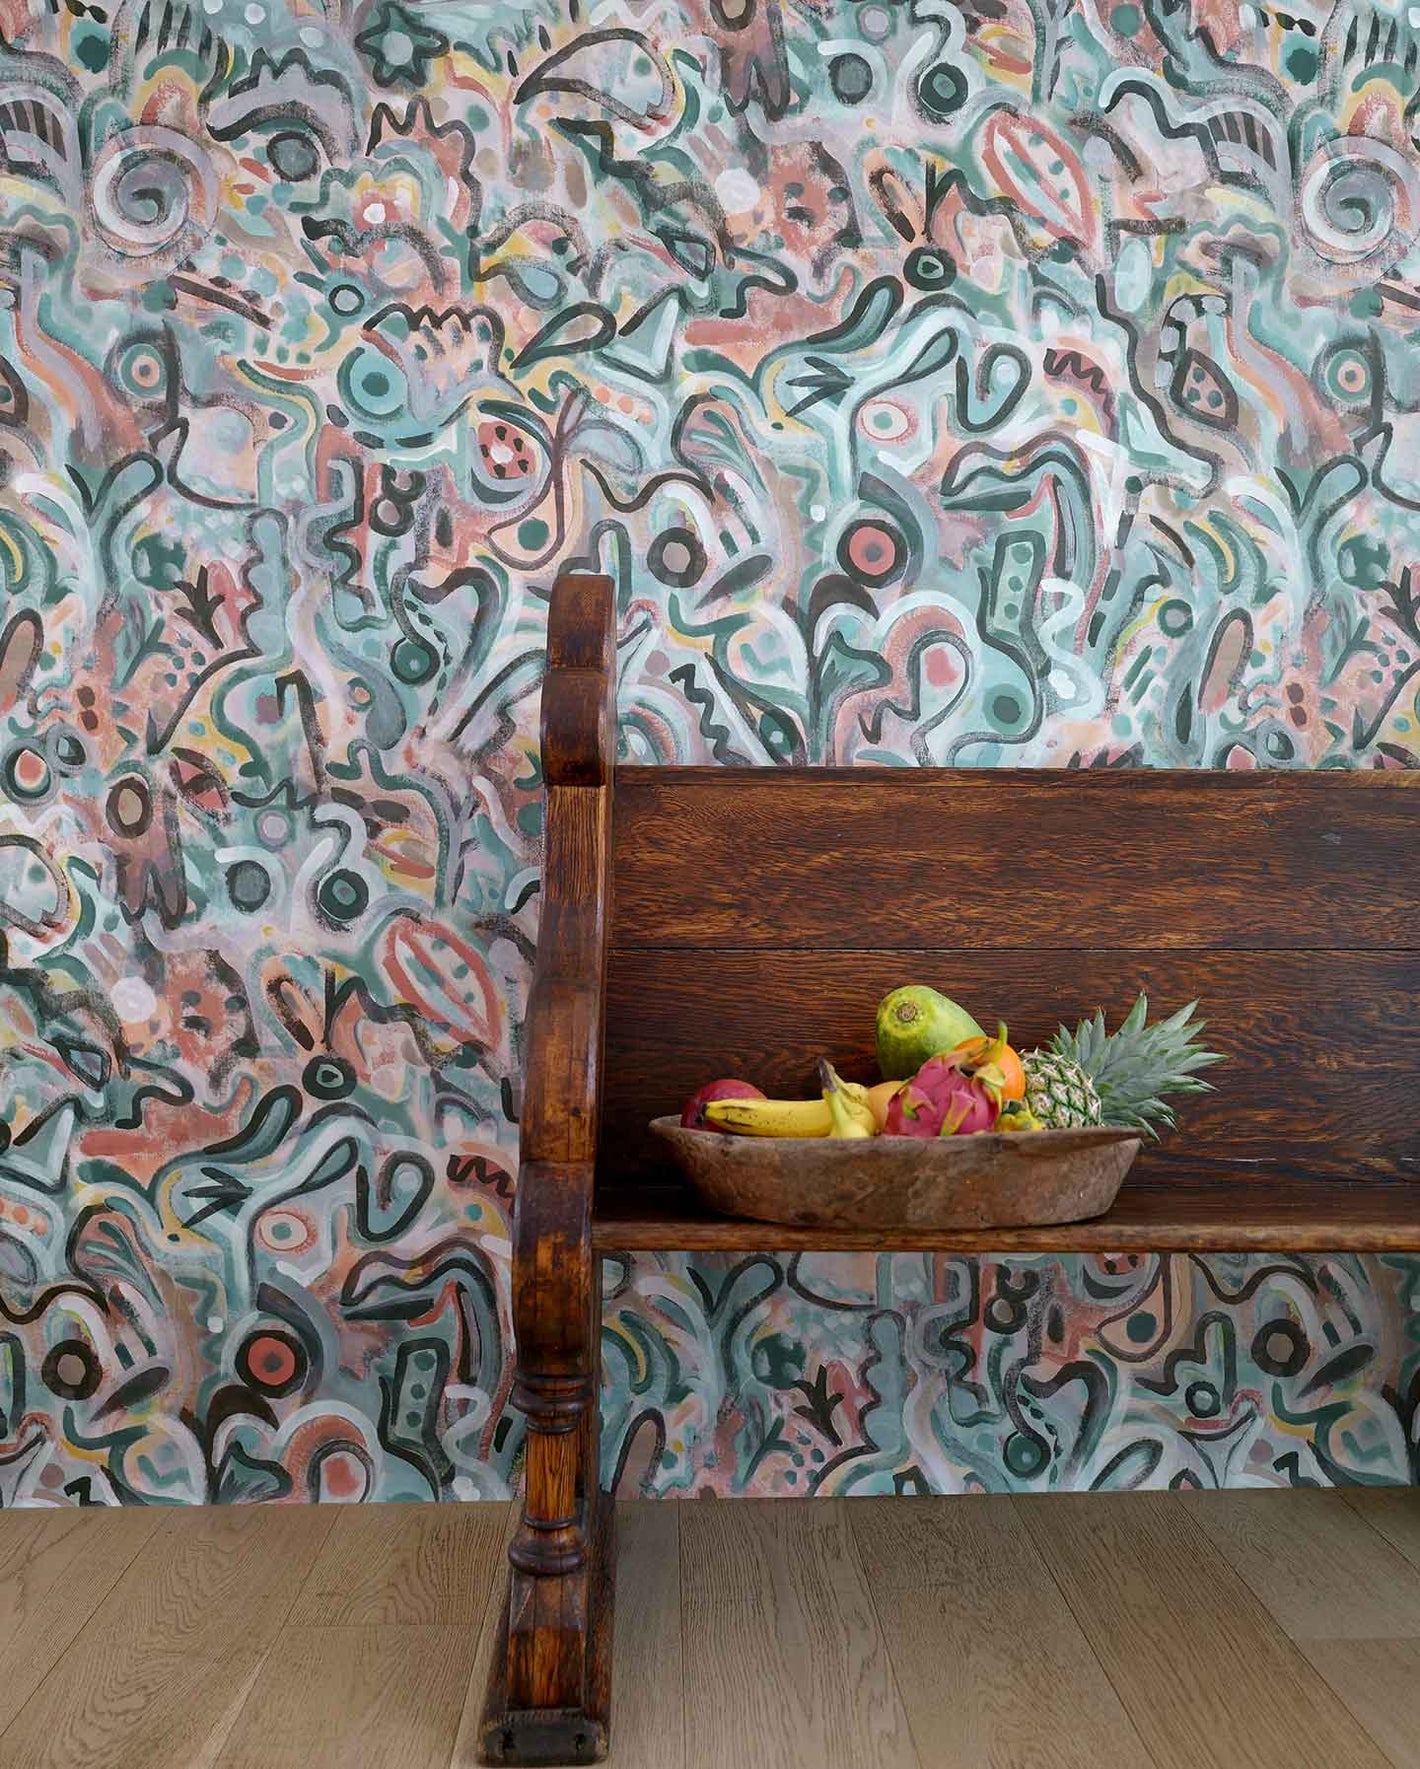 Floripa wallpaper in reef installed in a room with a wood bench and a fruit basket.